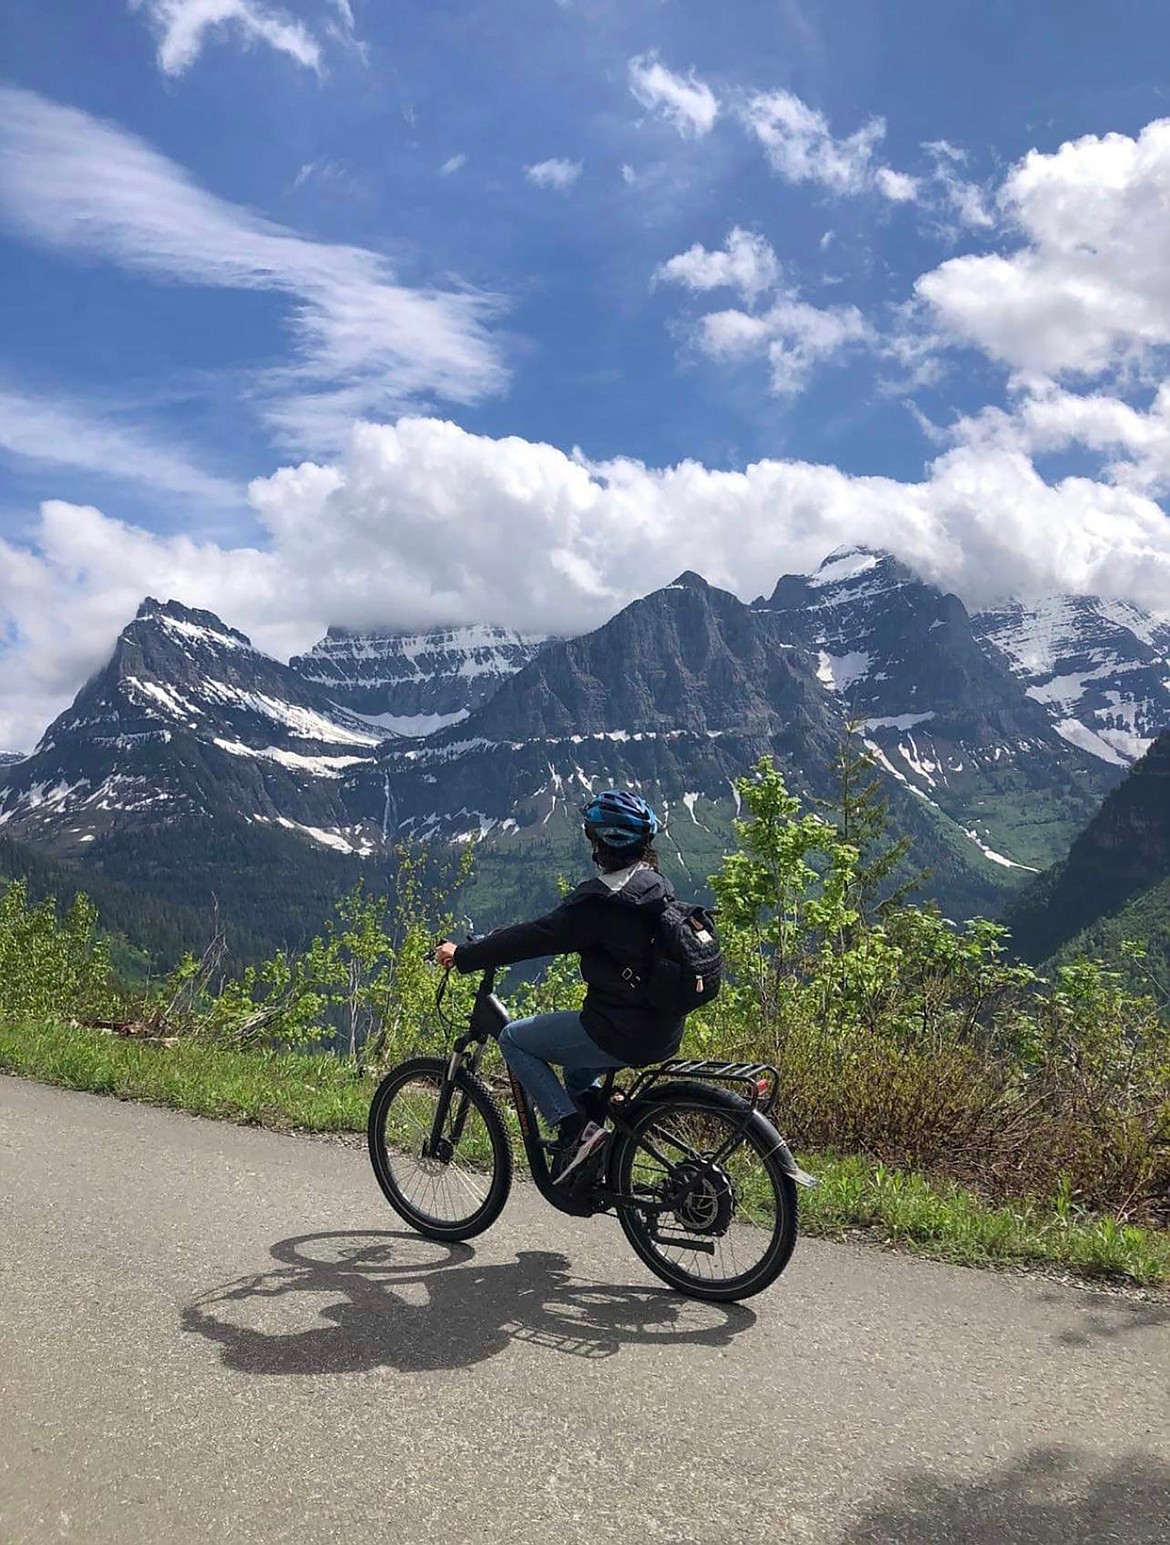 Riding an e-bike on Going to the Sun Road. (Photo provided)